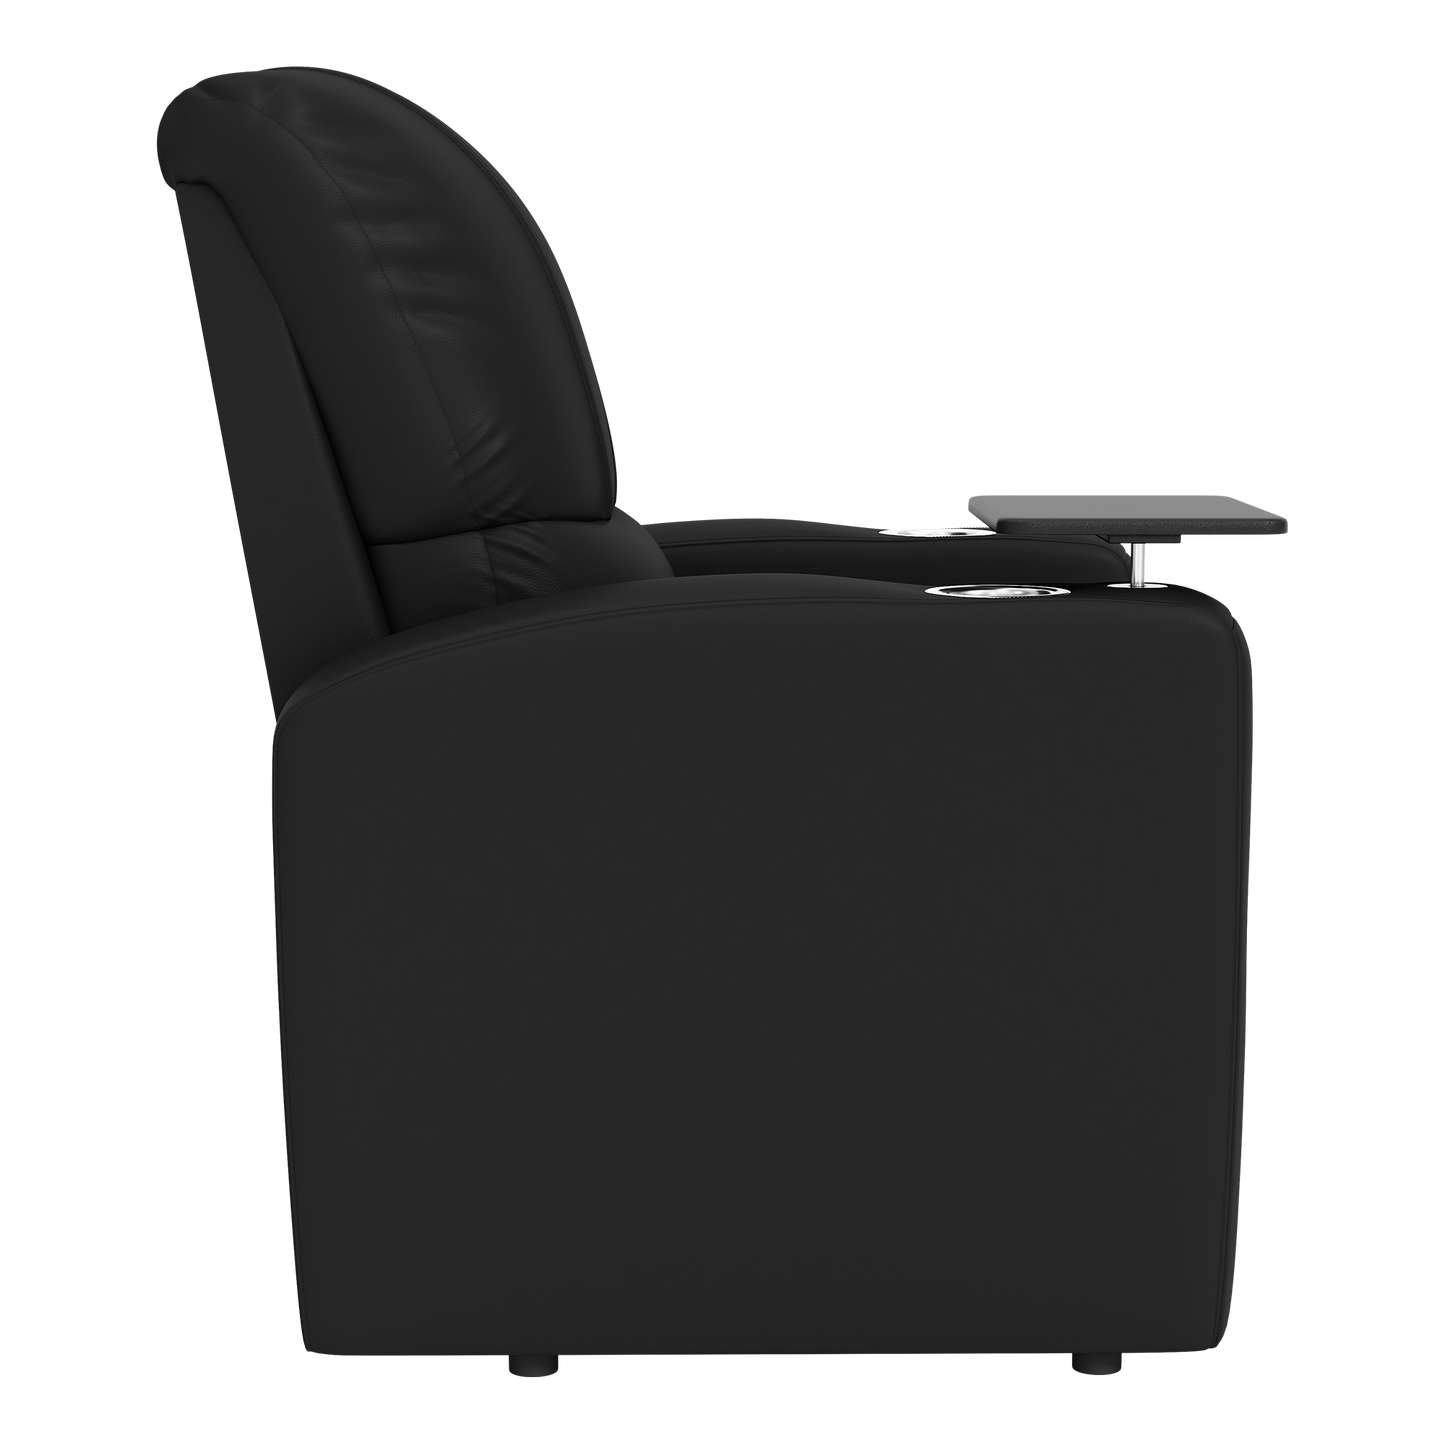 Stealth Power Plus Recliner with Ball State Cardinals